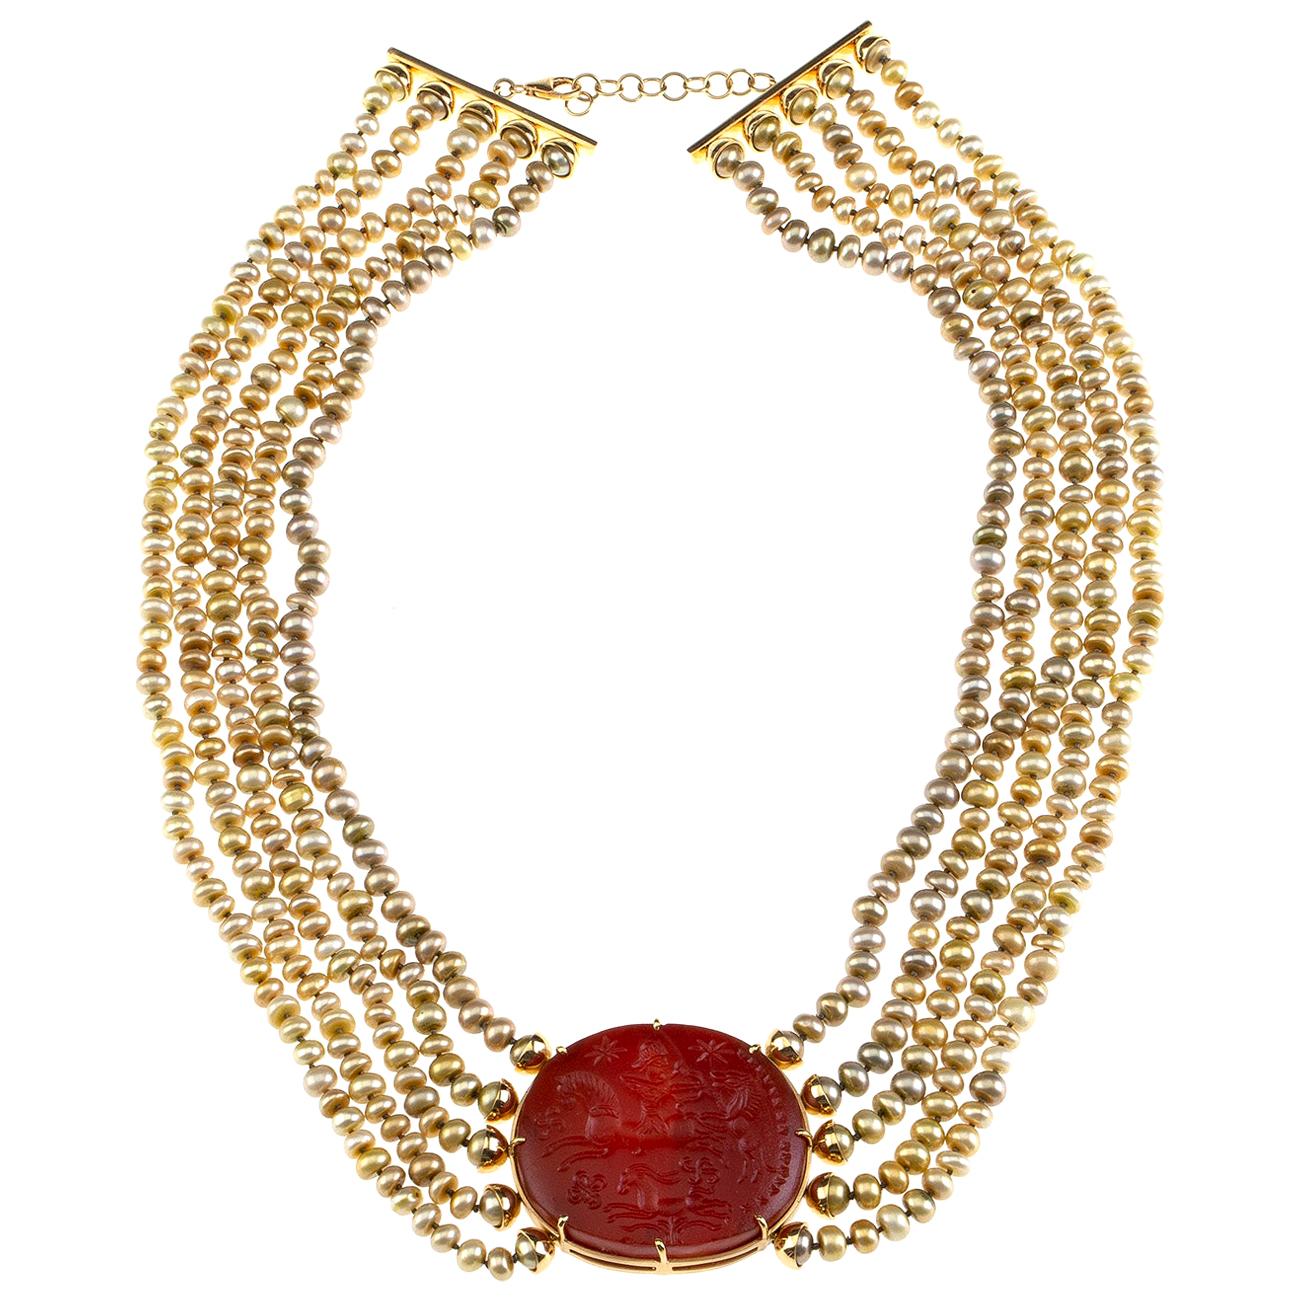 Carved Agate 18 Karat Gold Fresh Water Pearls Necklace